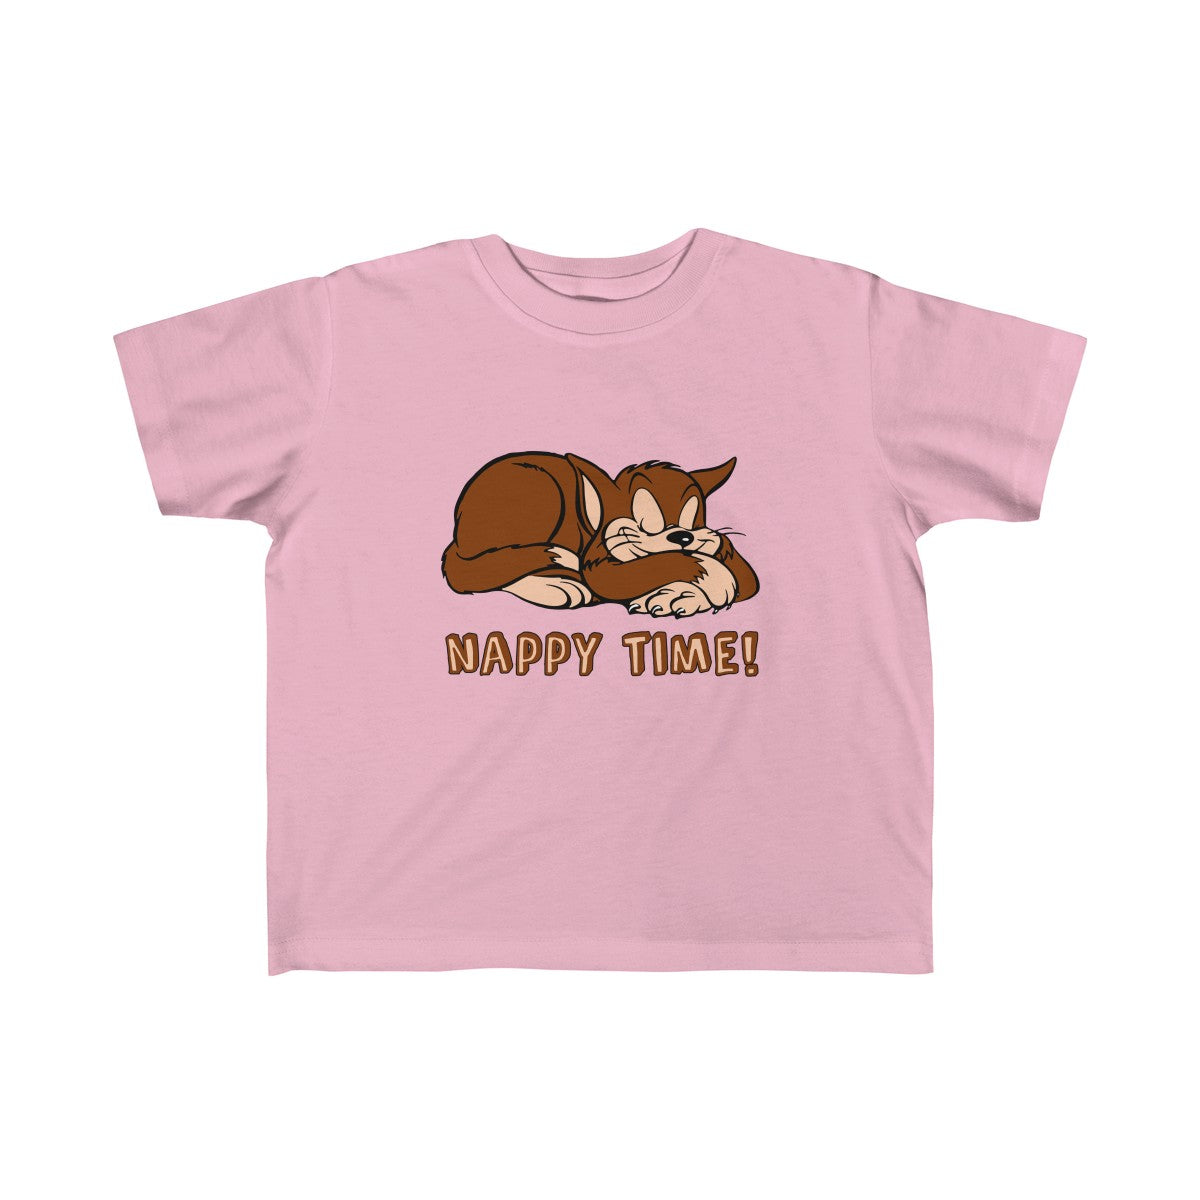 Nappy Time! with Sleeping Cat Toddler Fine Jersey Tee-Kids clothes-PureDesignTees